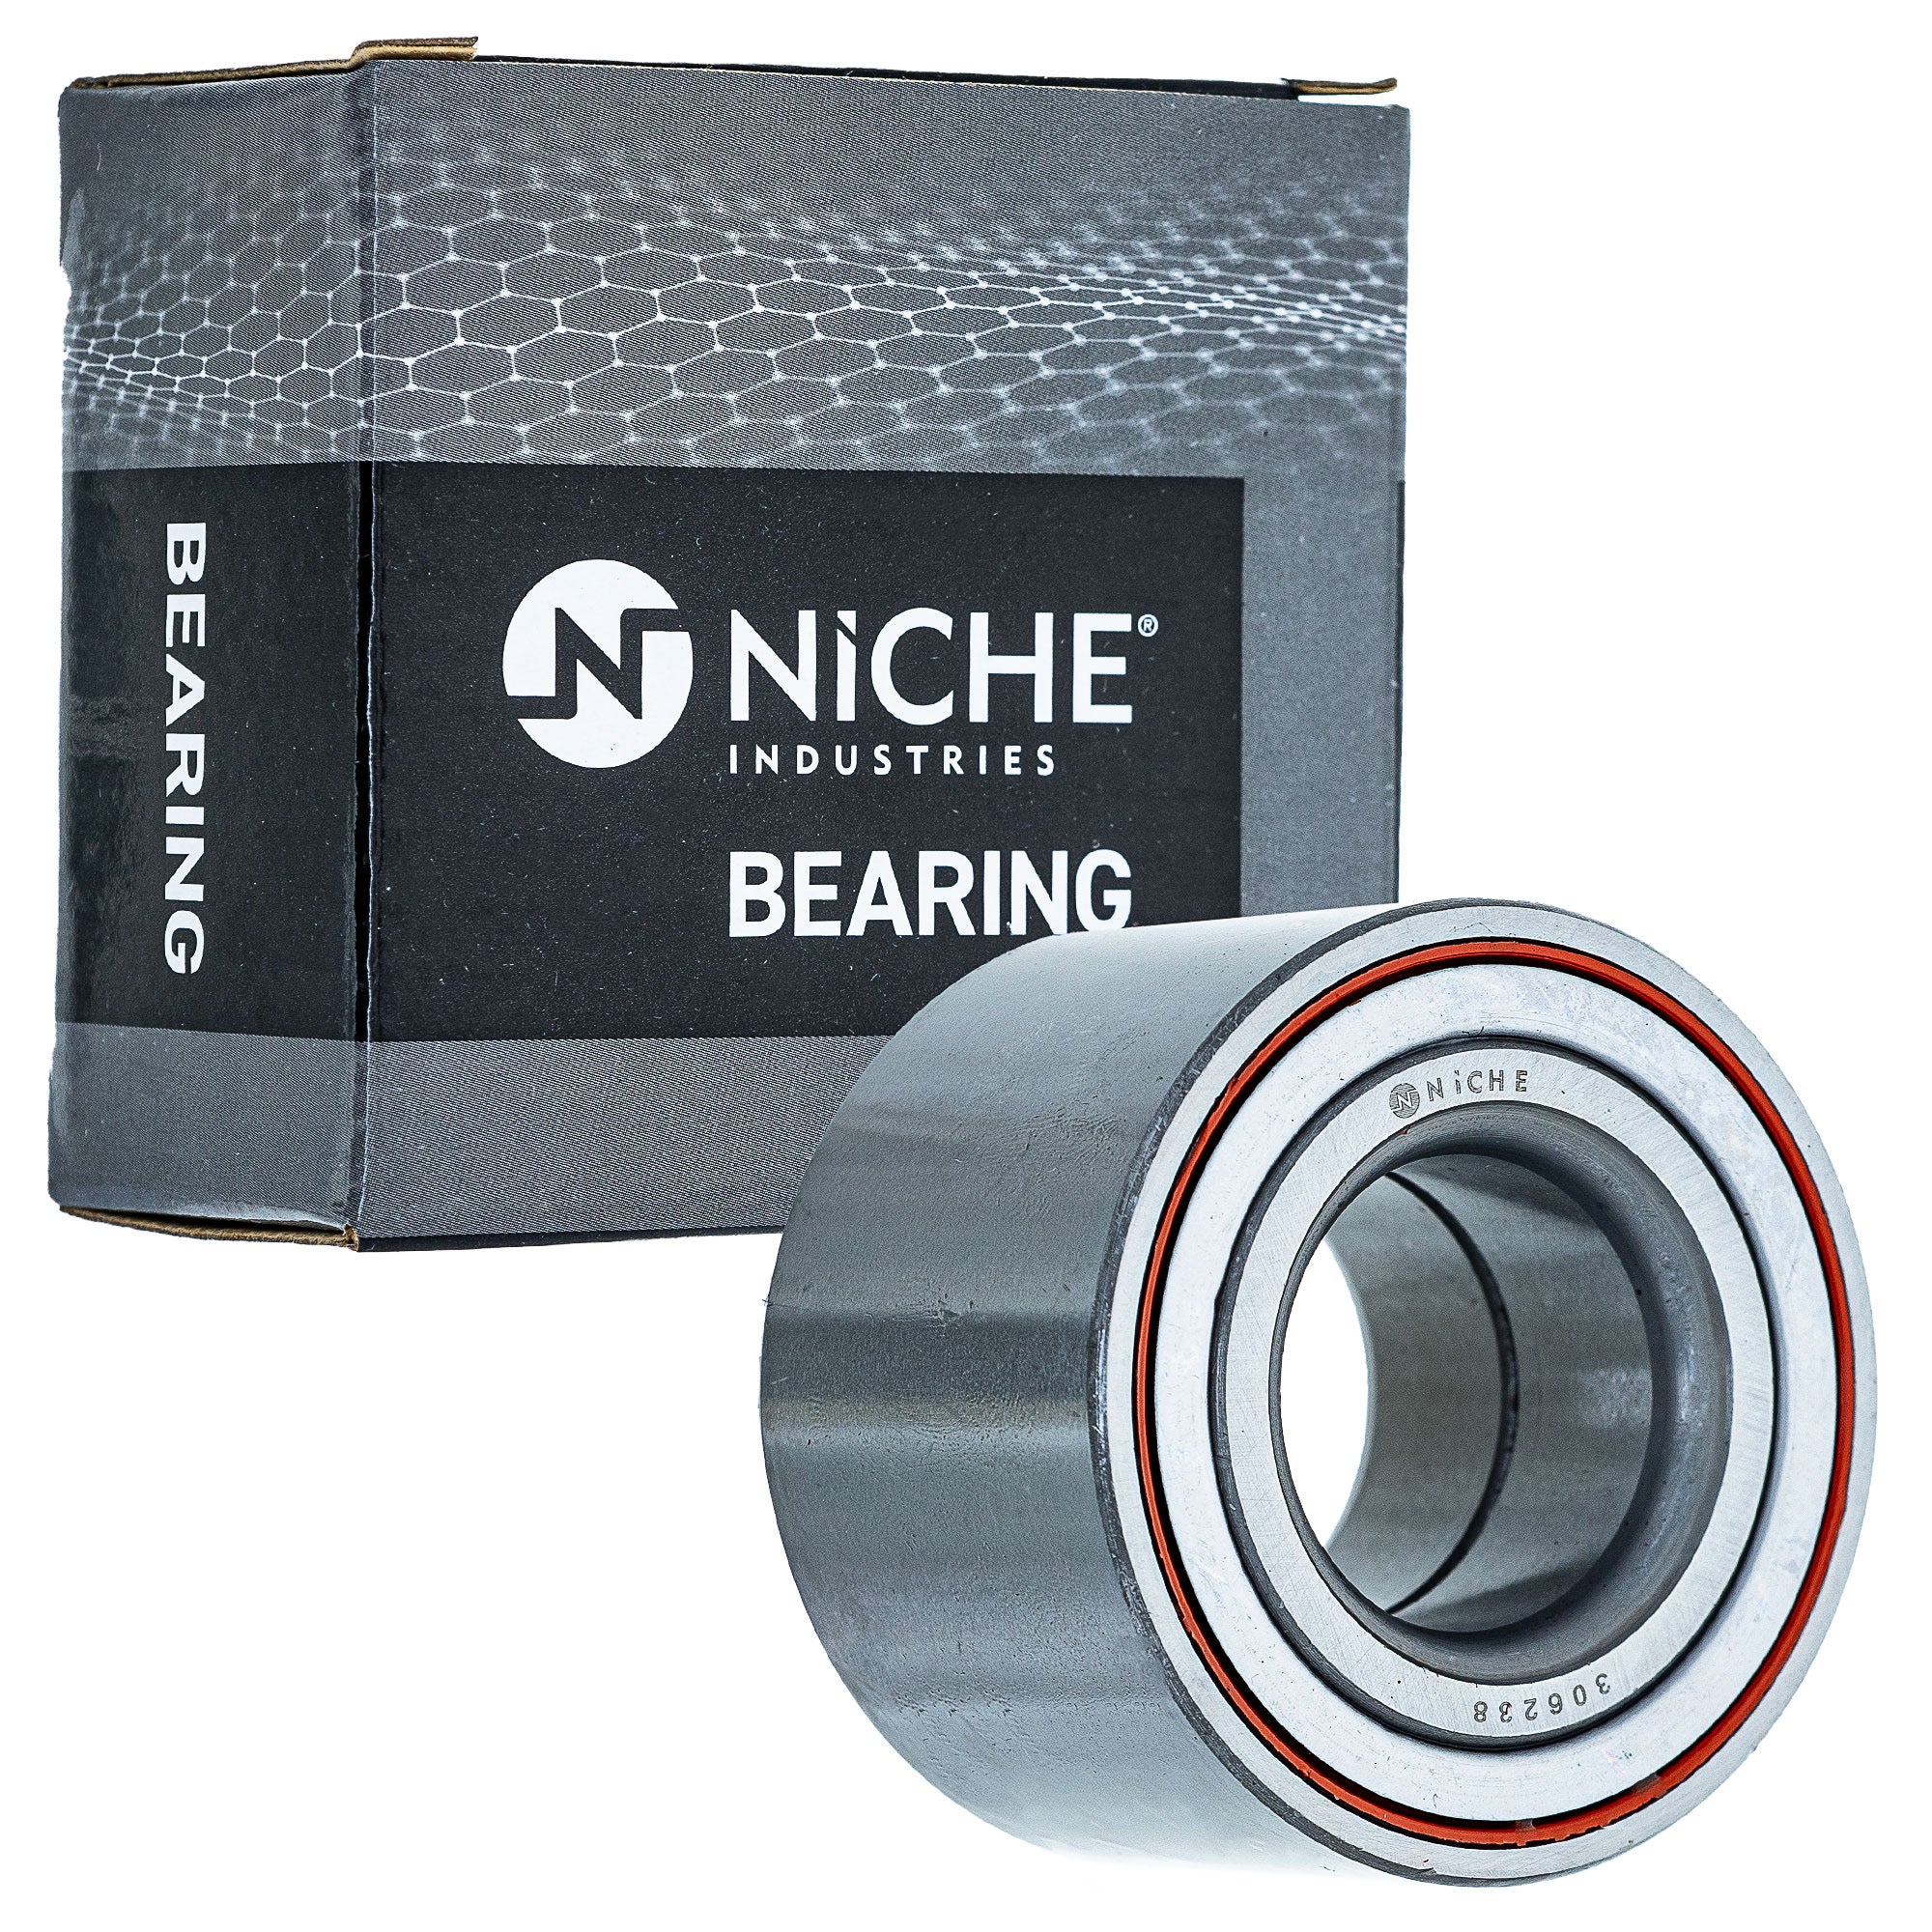 NICHE 519-CBB2203R Bearing 10-Pack for zOTHER Outlander